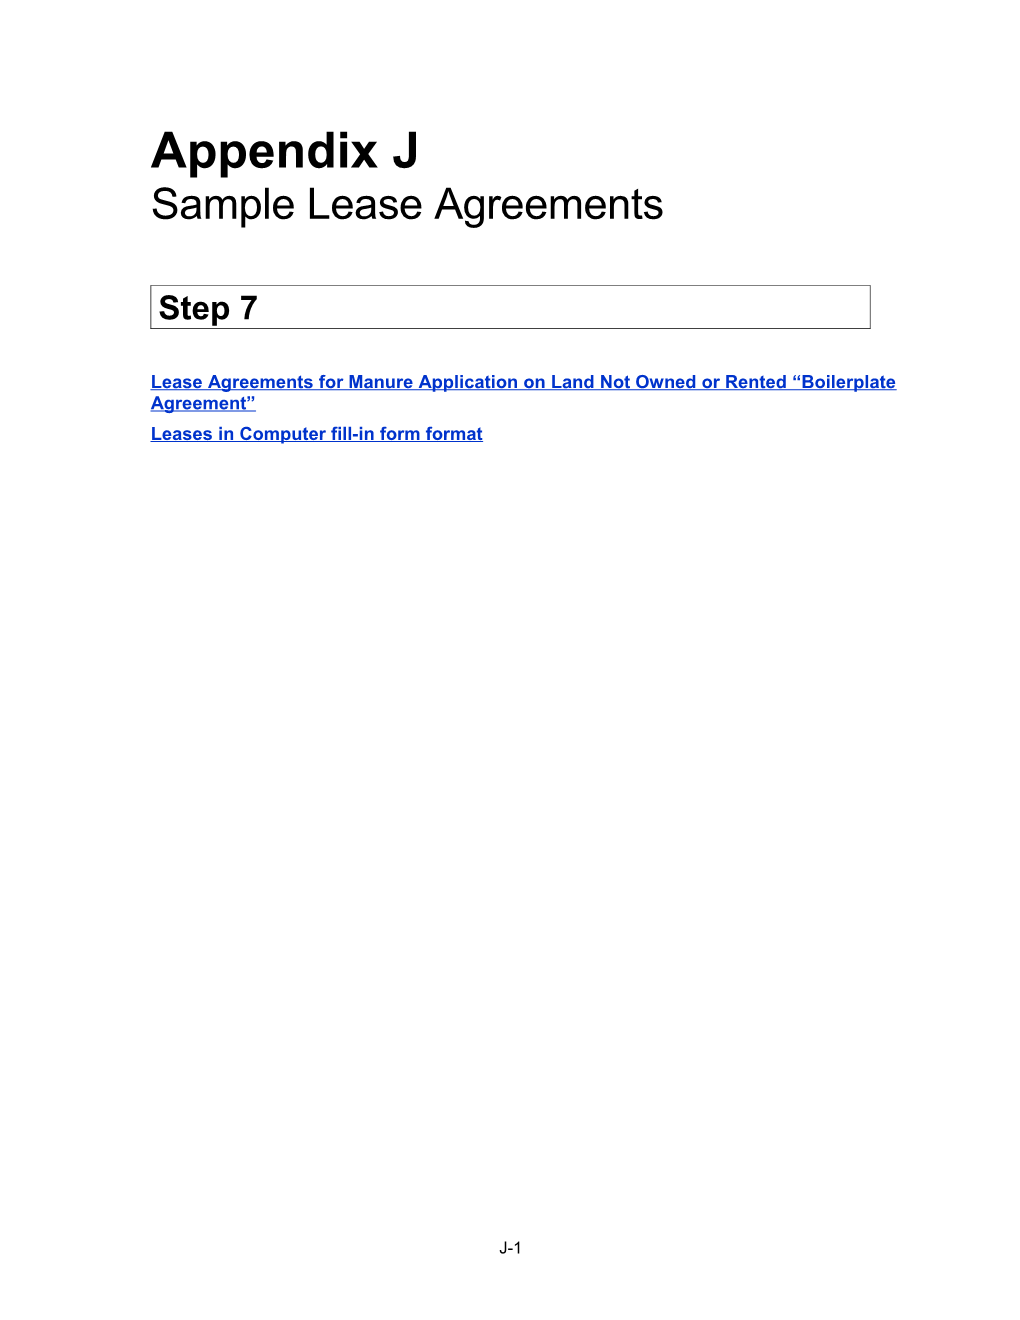 Sample Lease Agreements (Step 7)